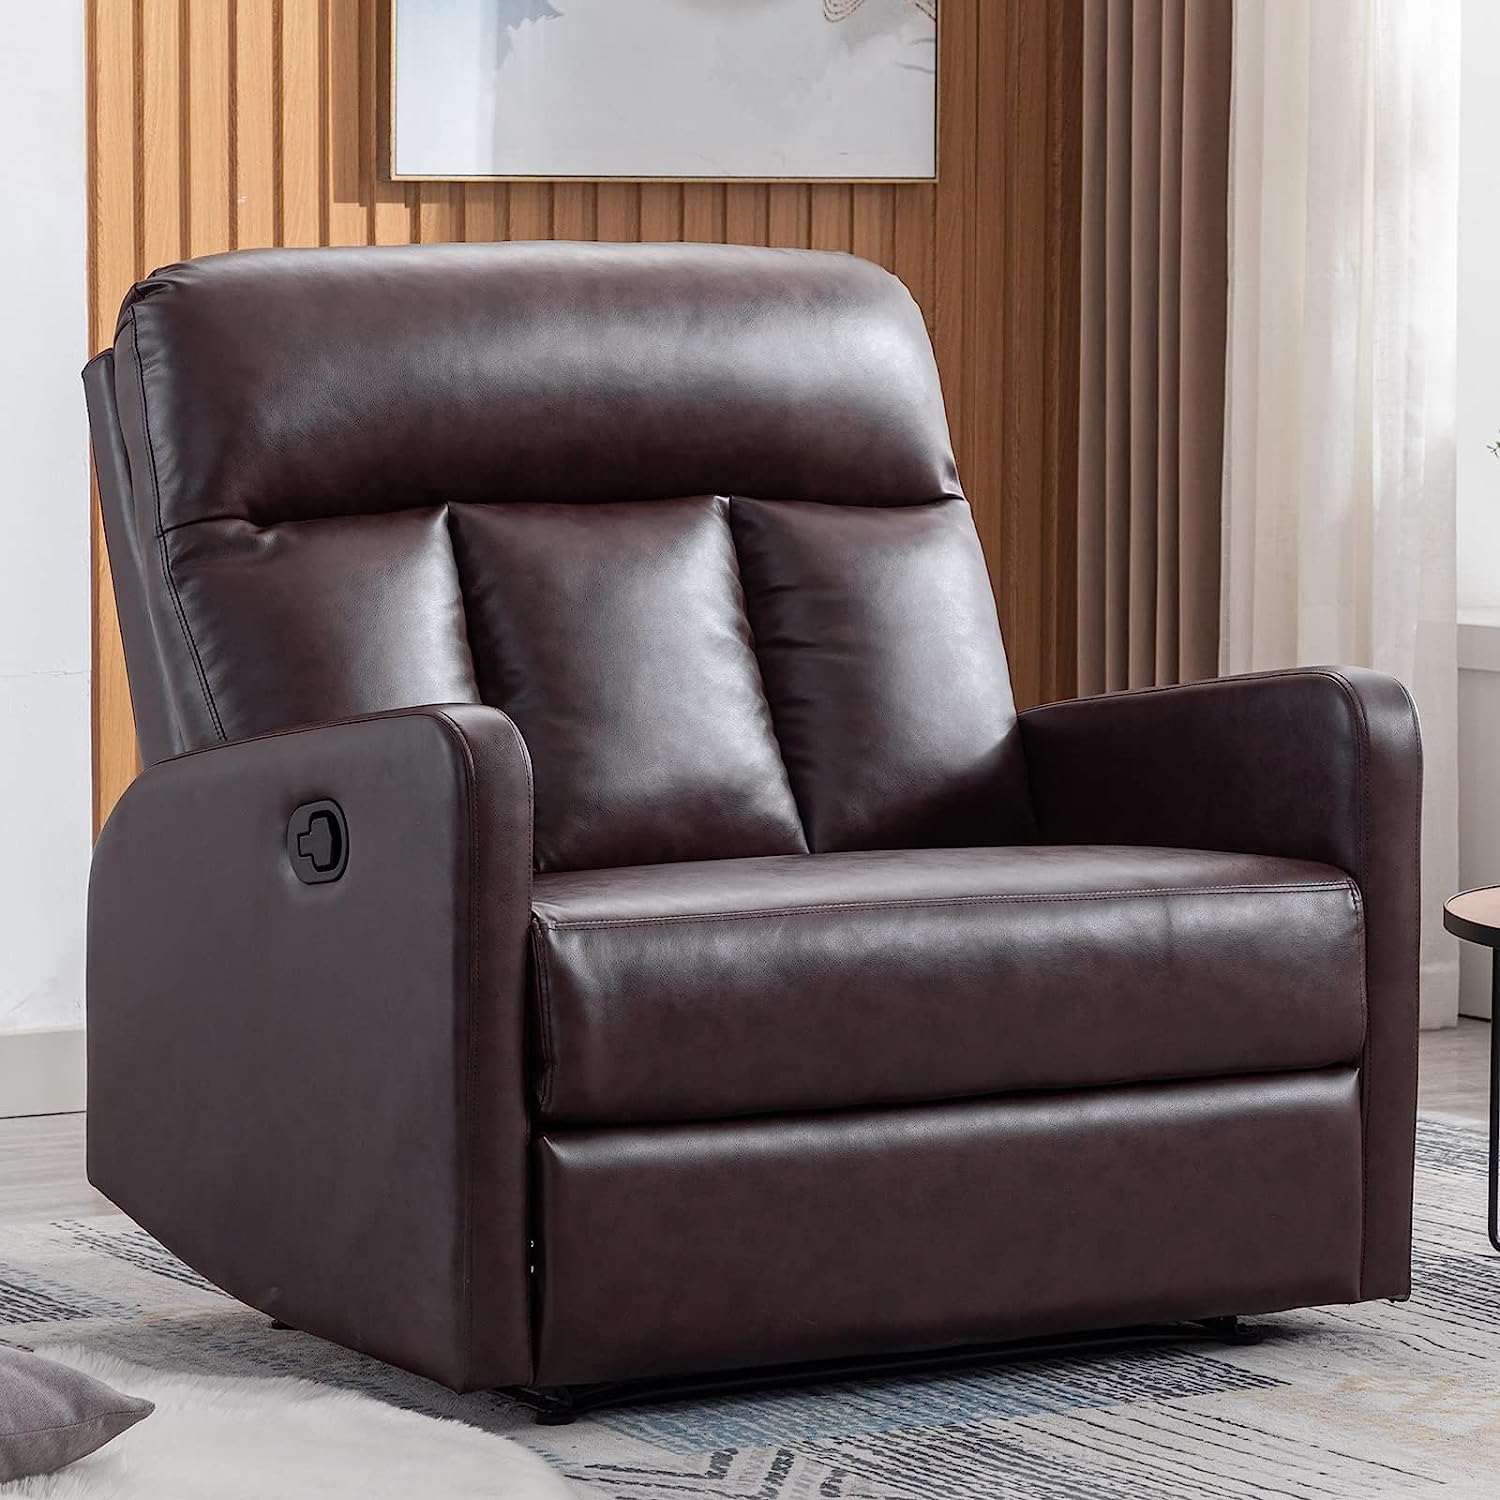 ANJ Oversized Wide Recliner Chair Faux Leather [...]